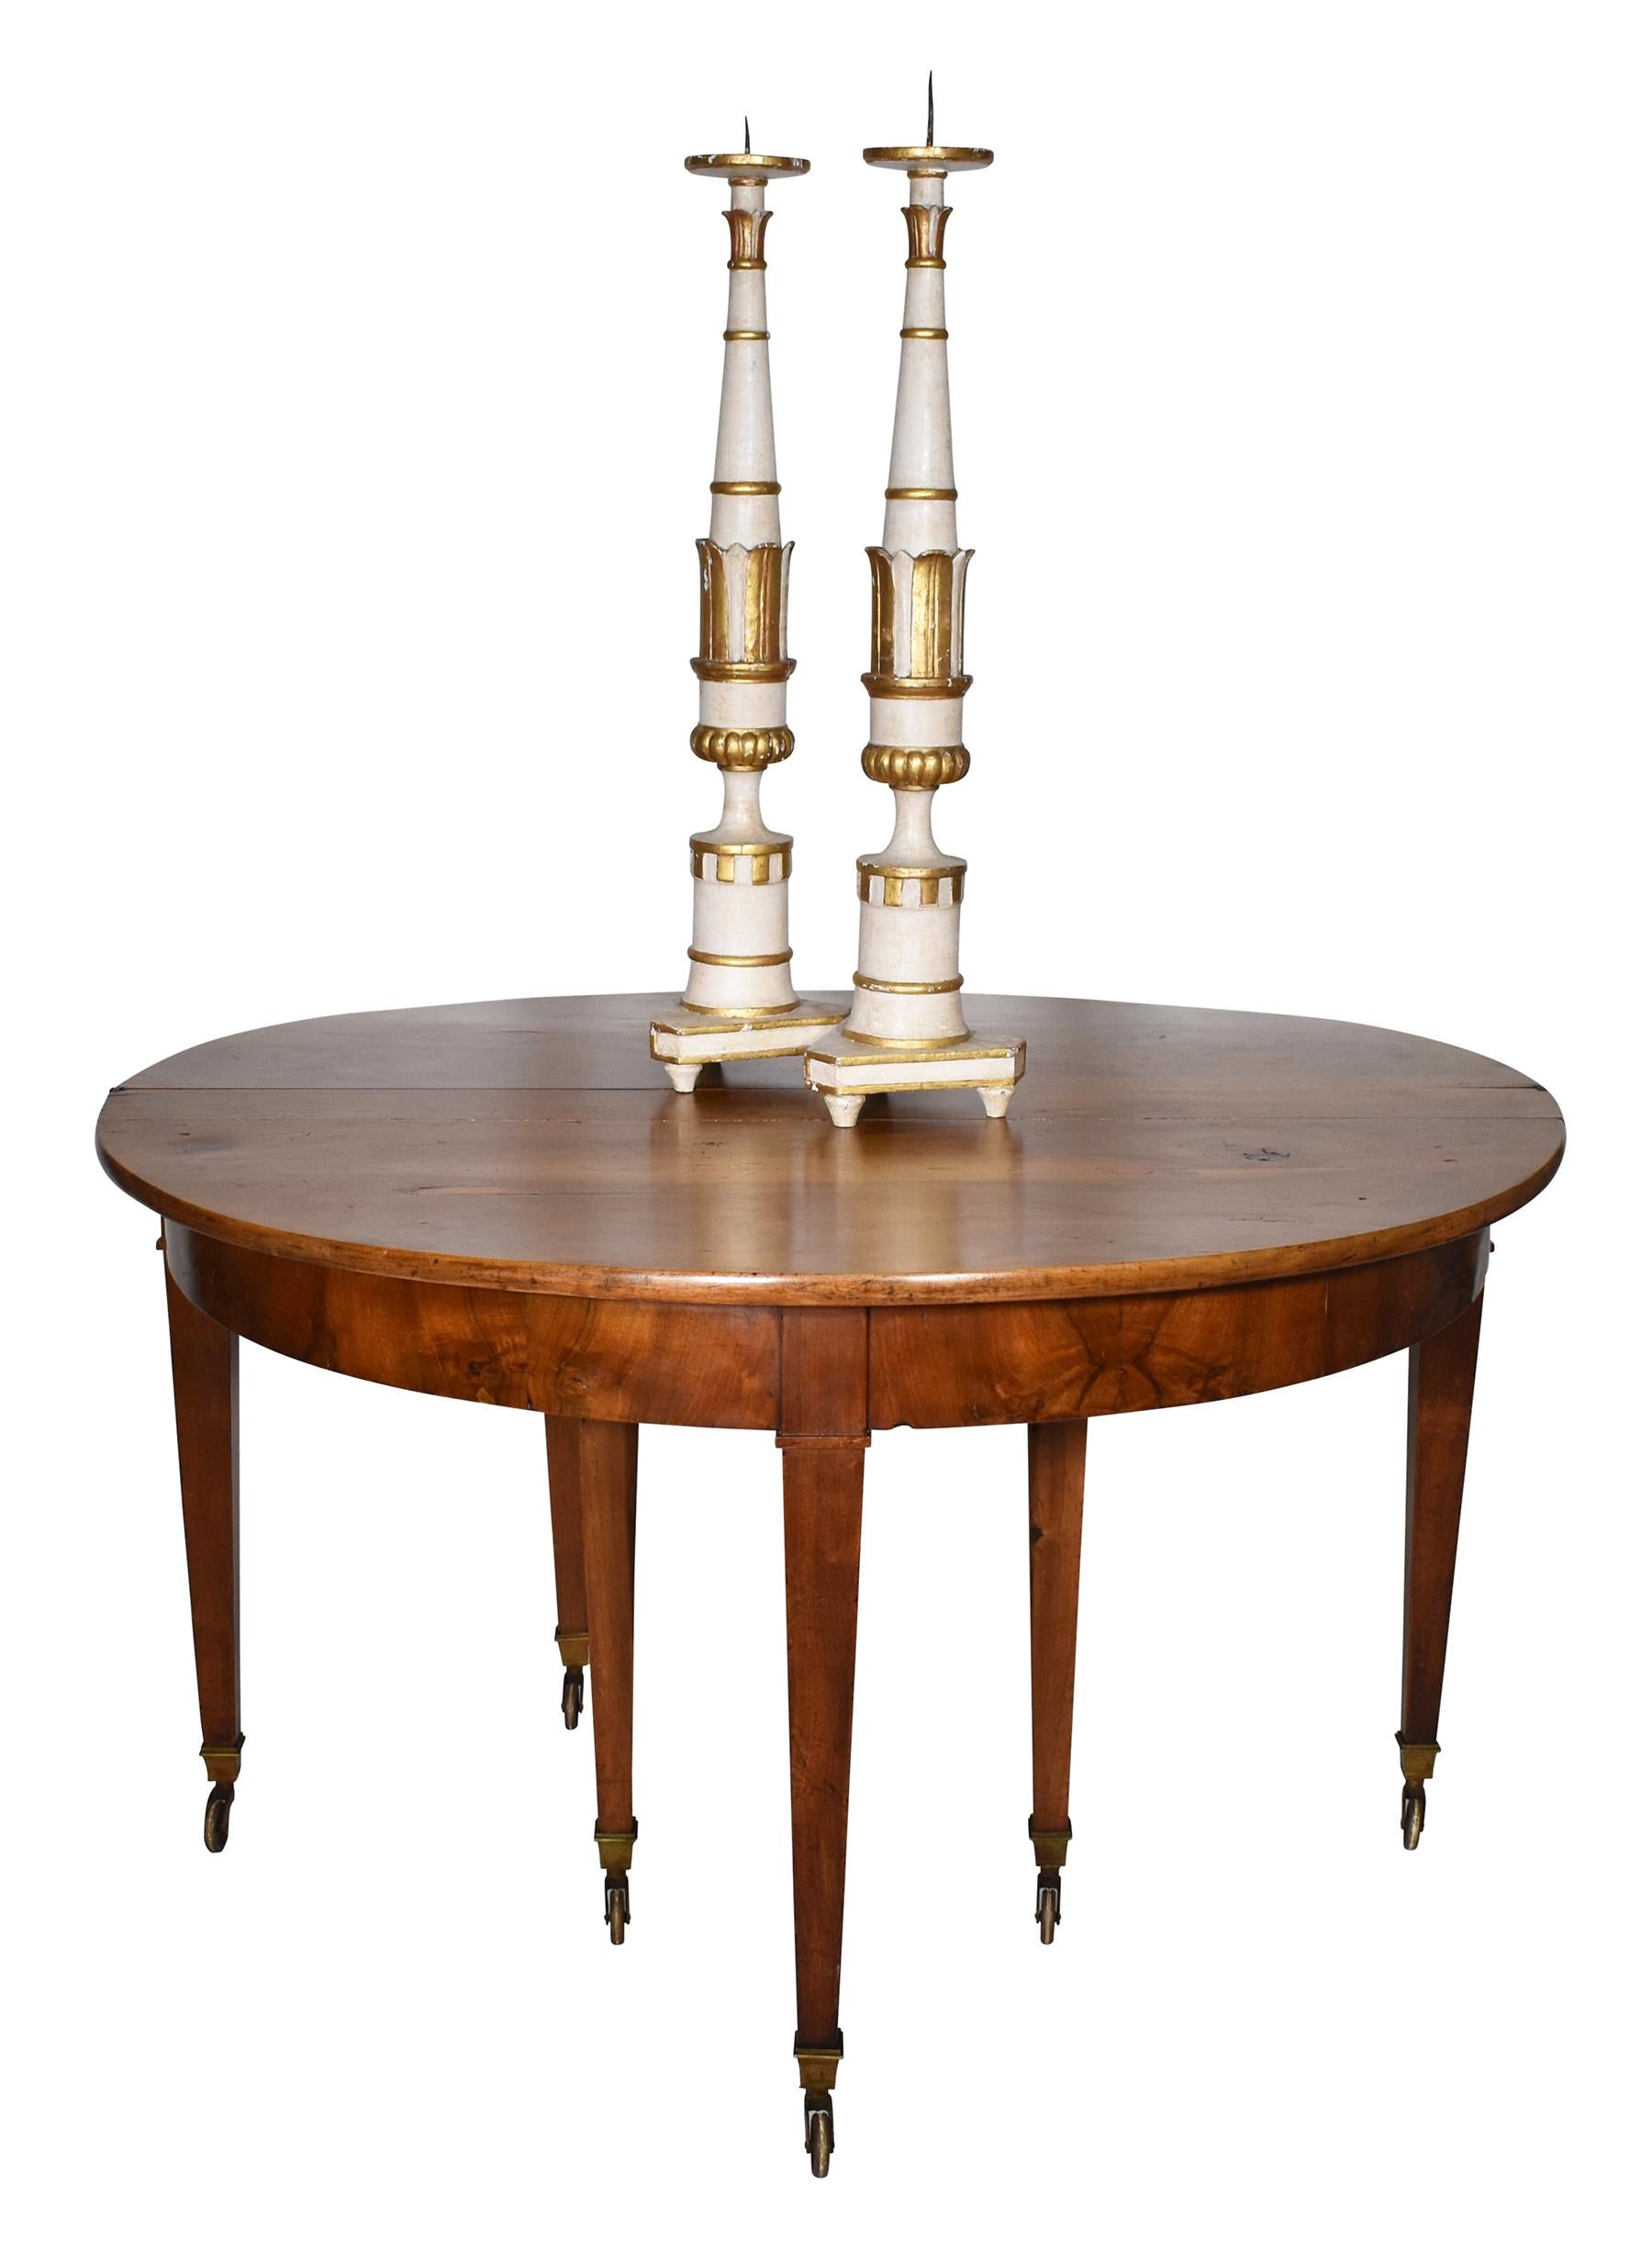 Walnut 19th Century Louis XVI Dining Table with straight tapering legs and brass casters. The table expands to accept leaves for formal dining.